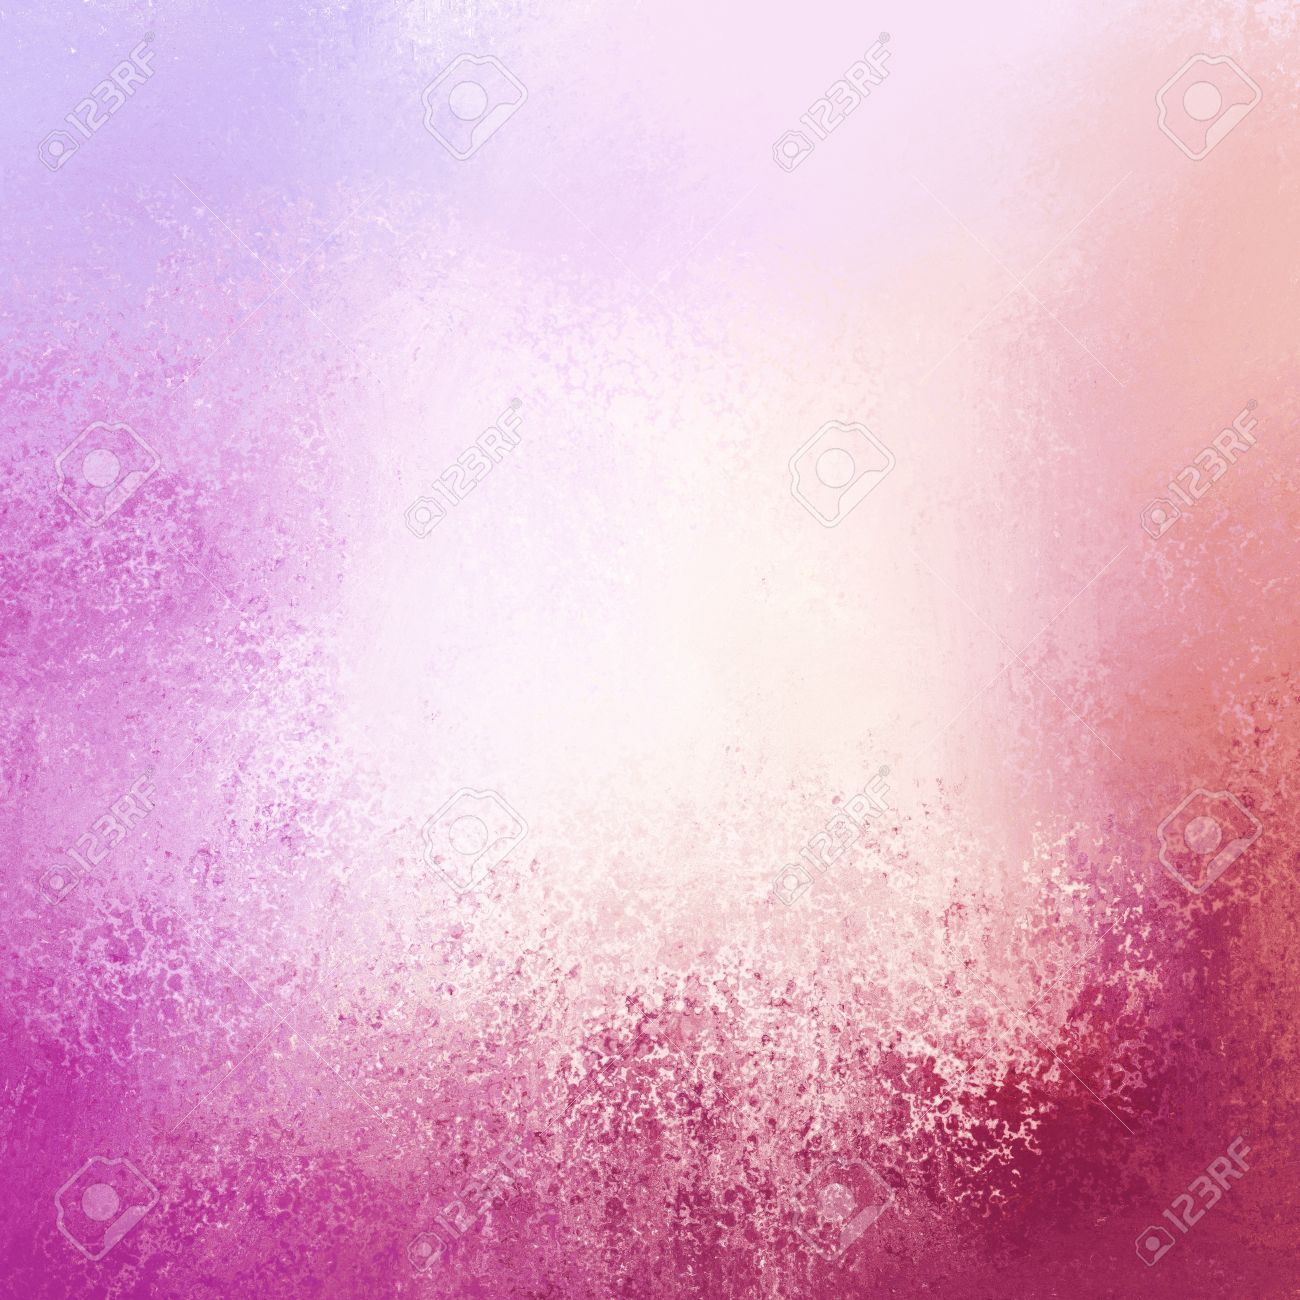 Pretty Pink Background With Purple Grunge Border And White Center